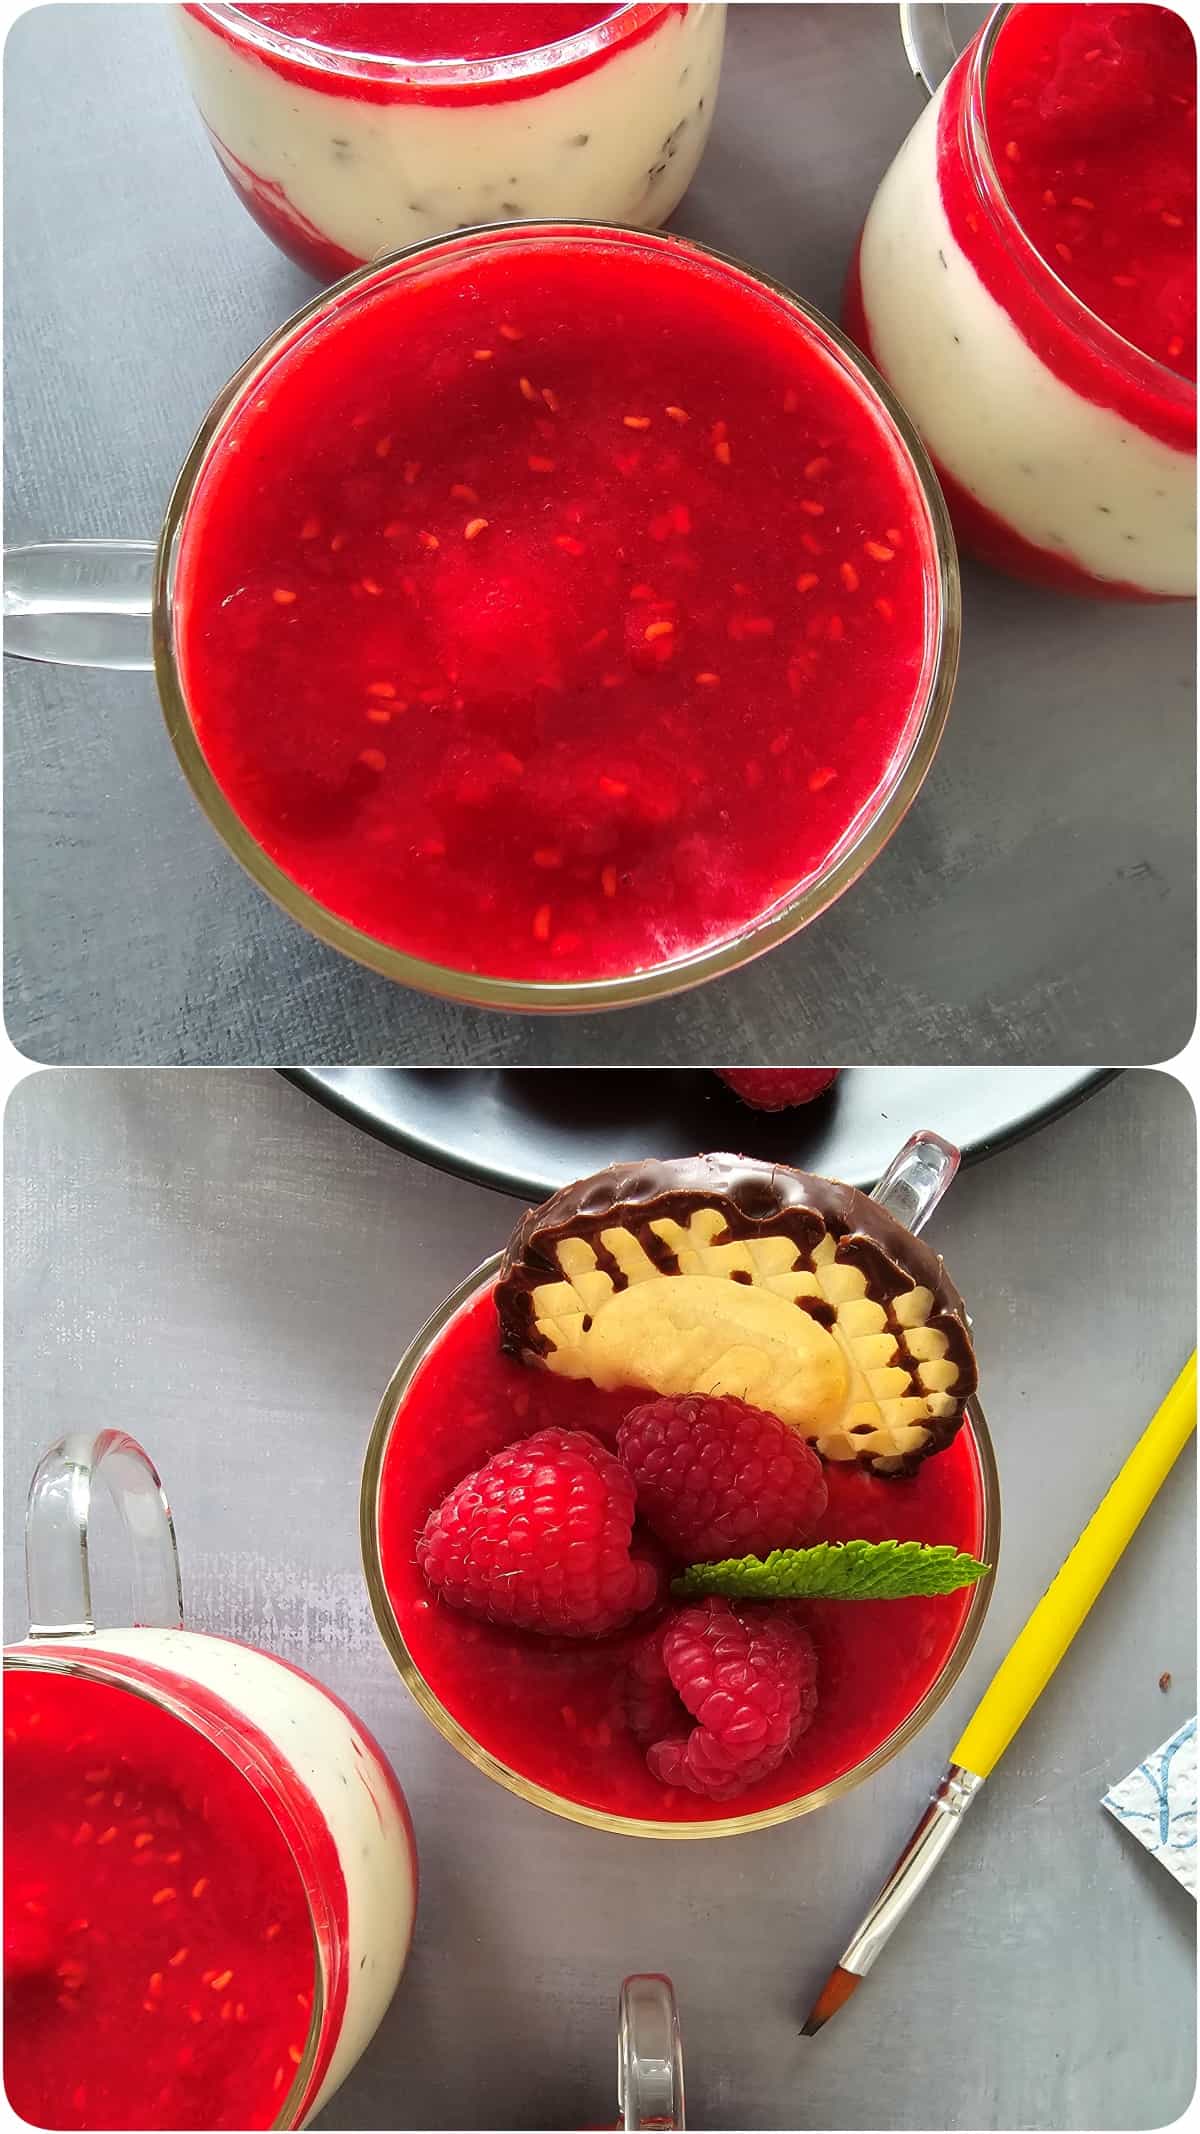 A collage of the preparation steps for Dickmann's dessert with raspberries.